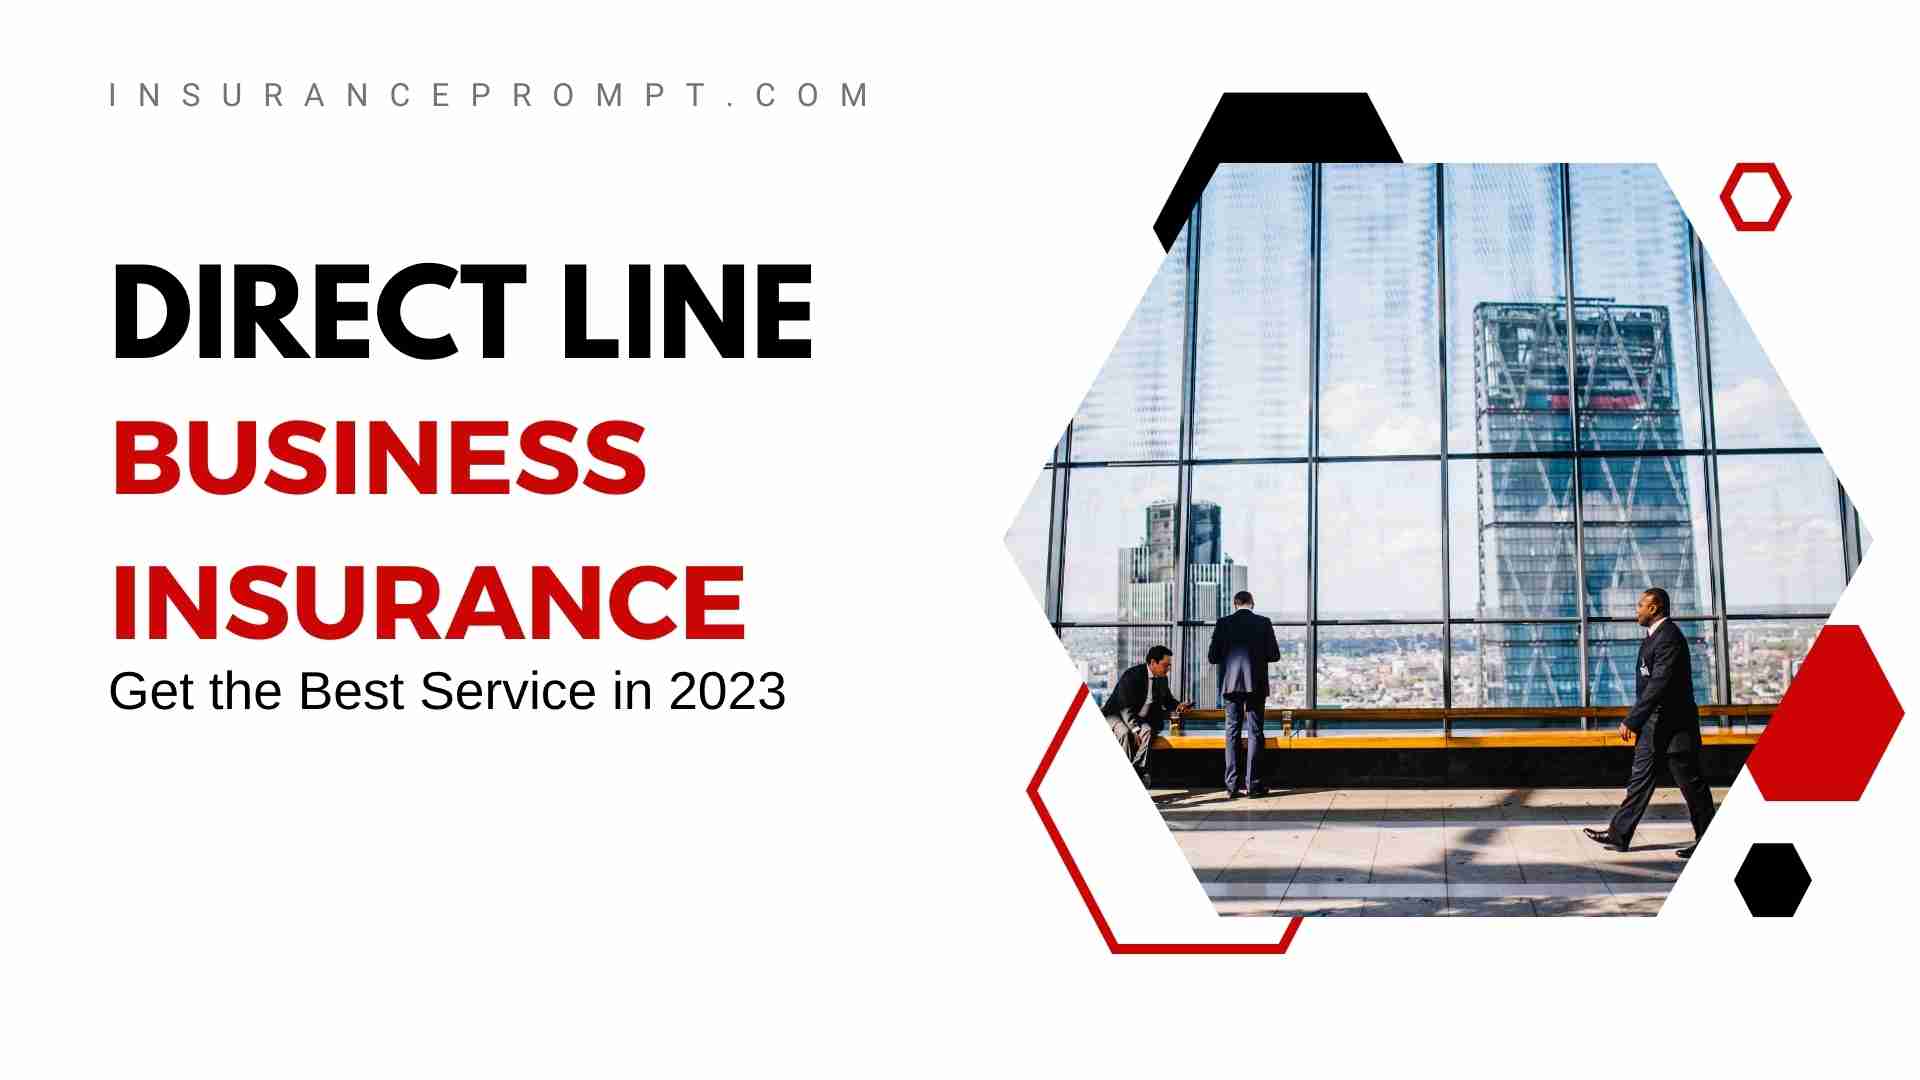 Direct Line Business Insurance